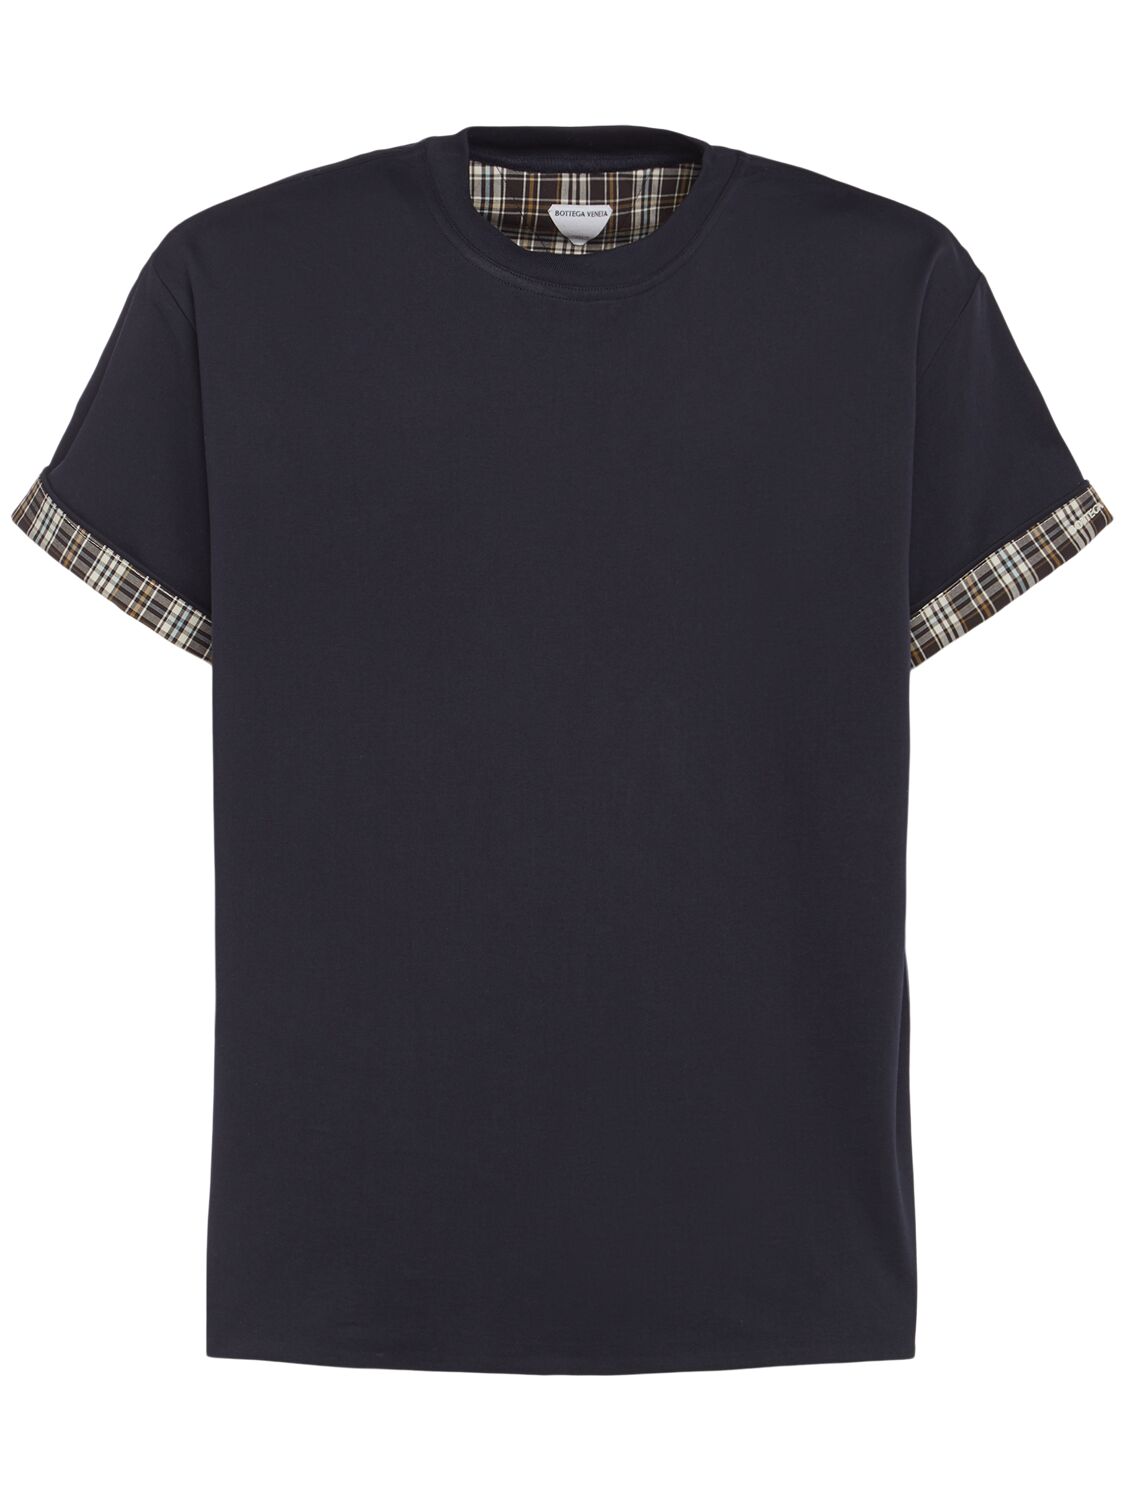 Double Layer Checked Cotton T-shirt